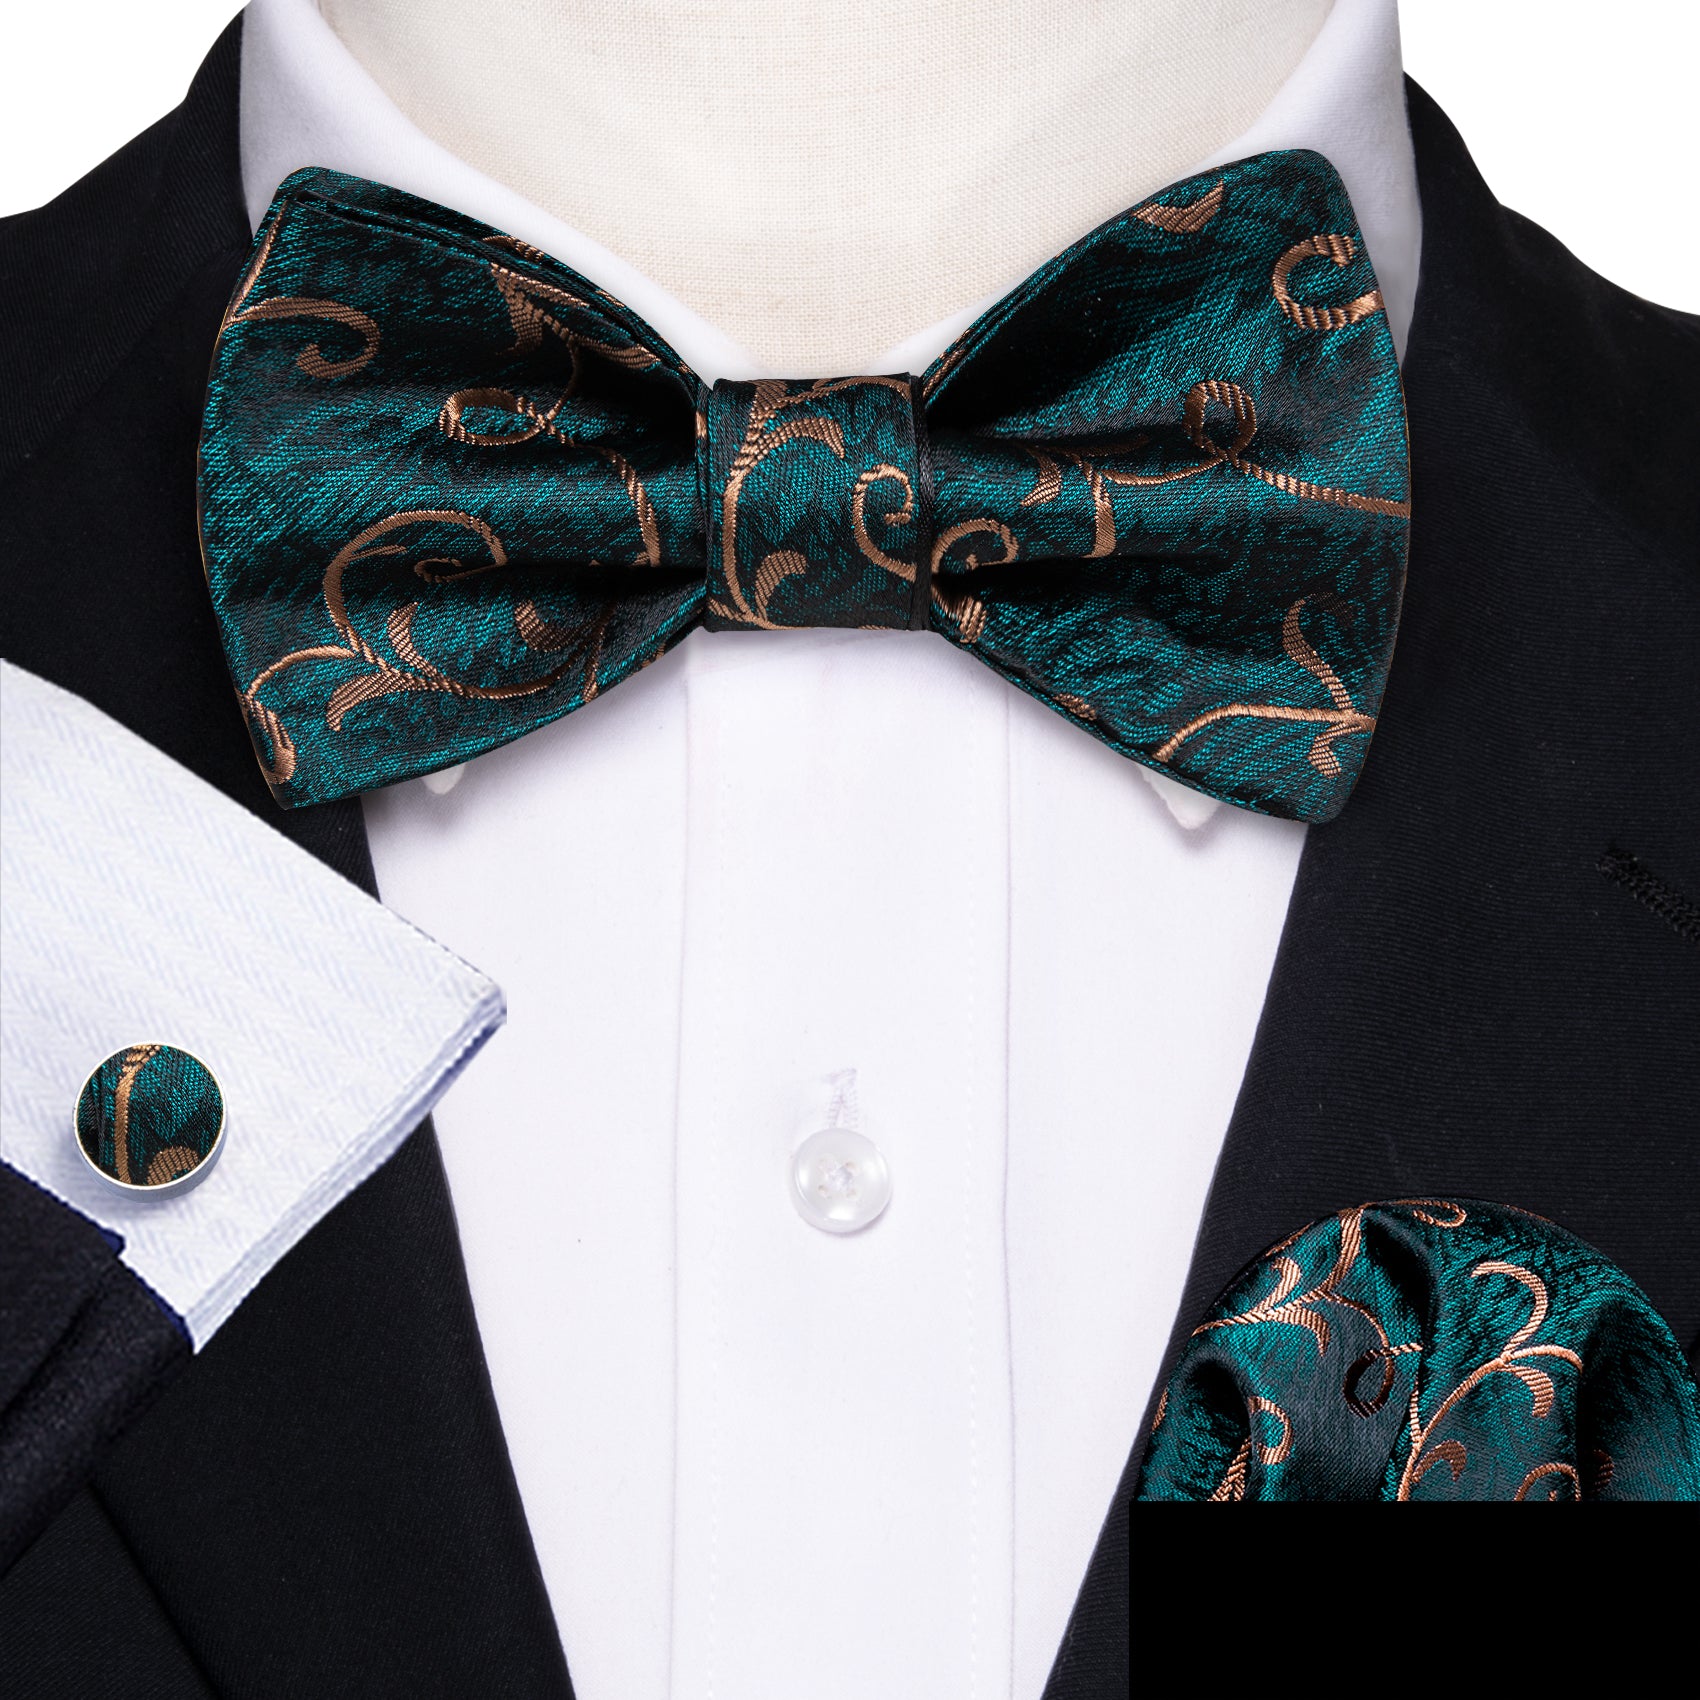 Barry.wang Floral Tie Green Gold Jacquard Woven Silk Self-Tie Bow Tie Set